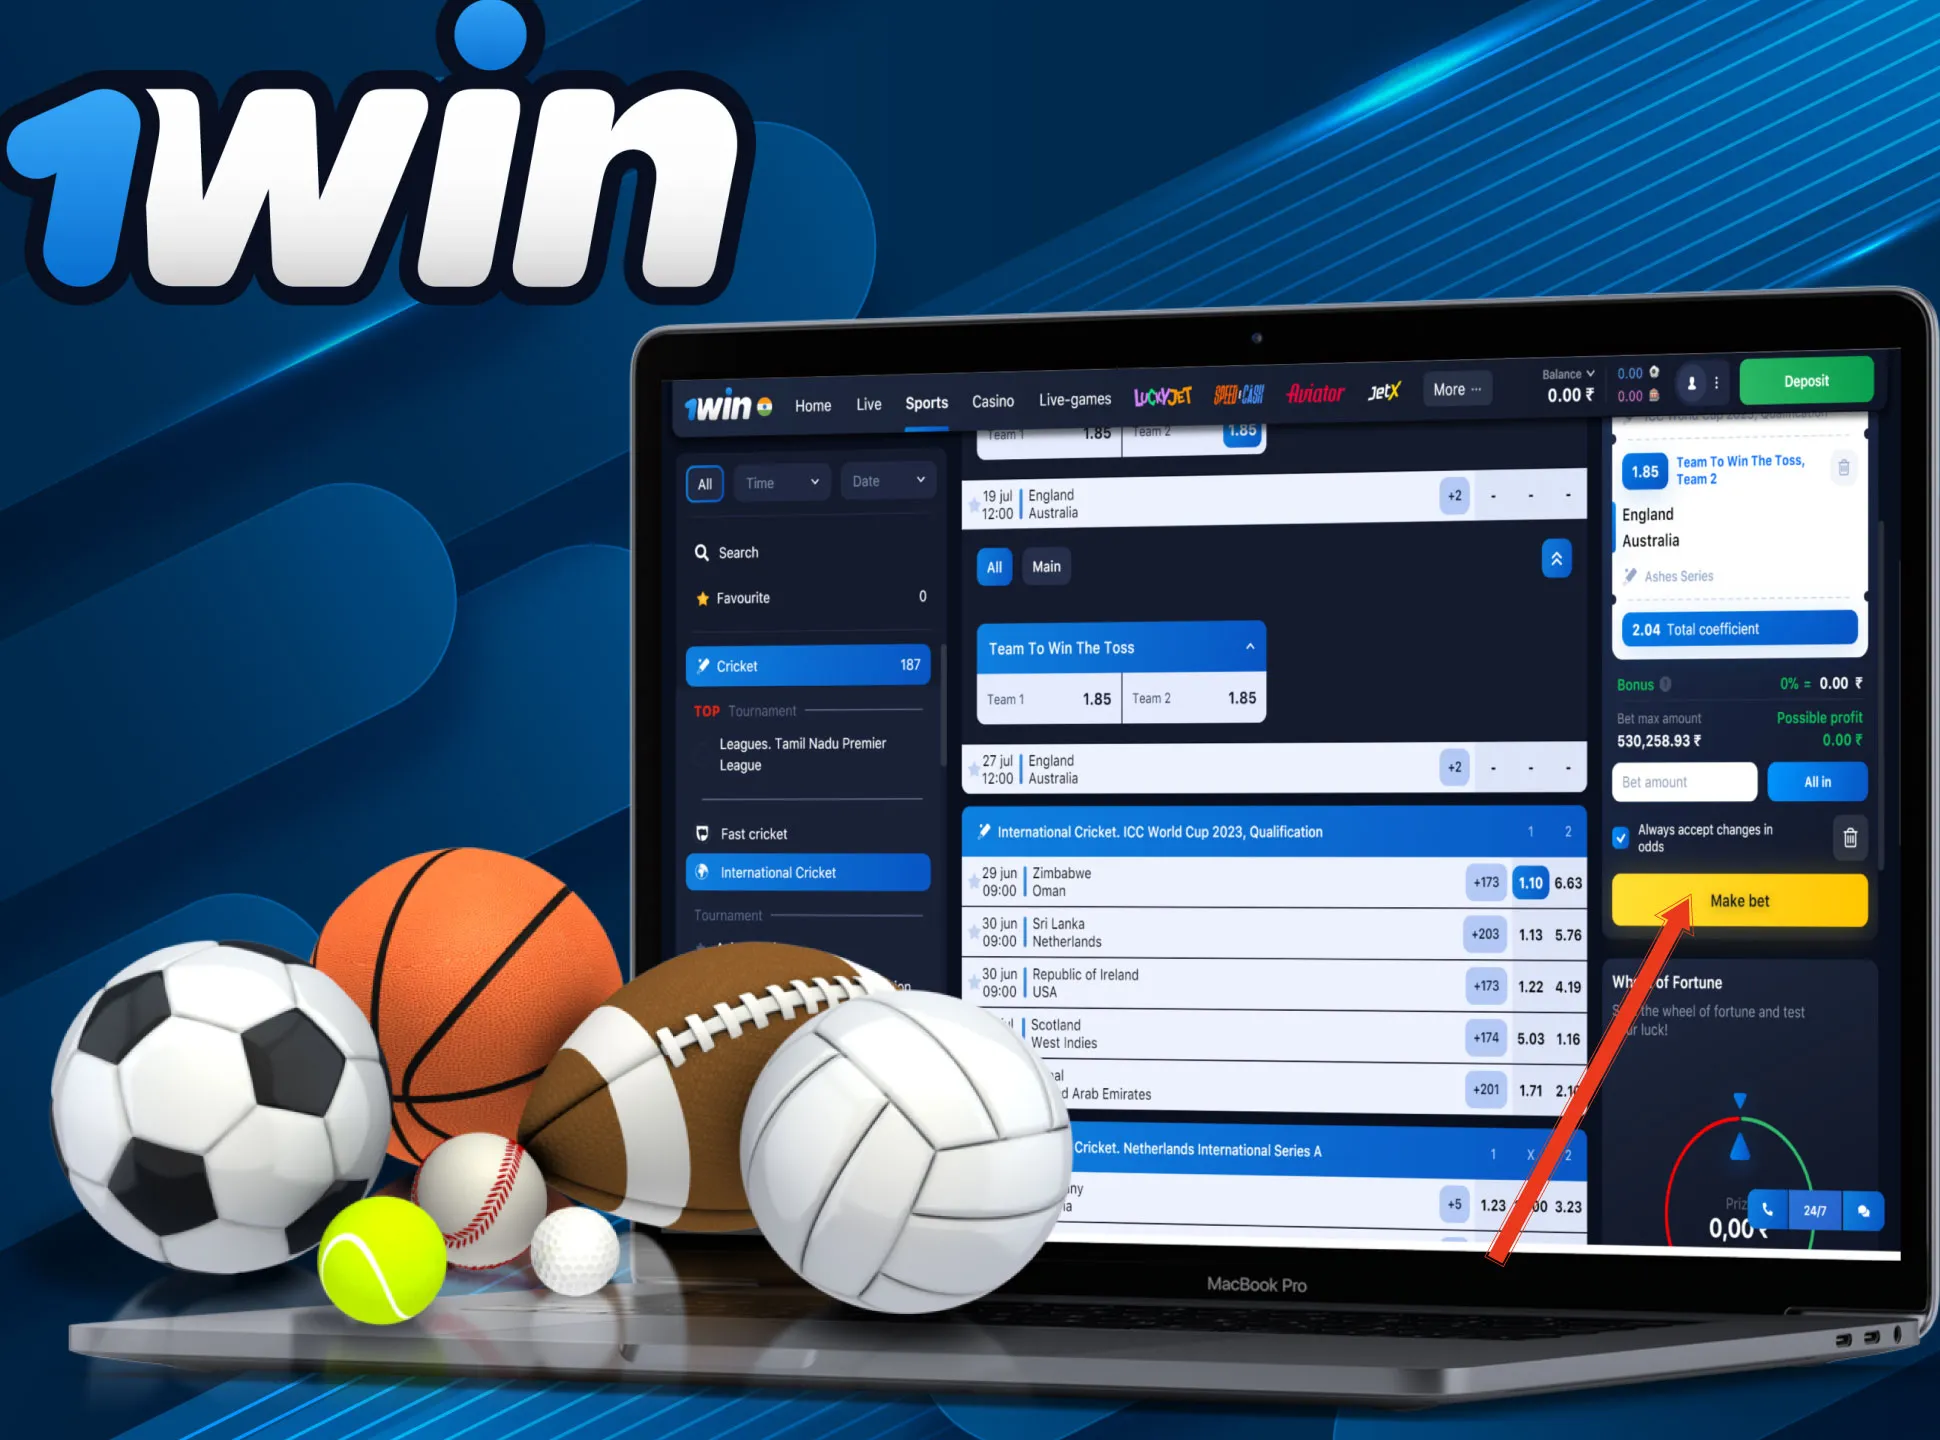 Choose a football match and place a bet on your team.